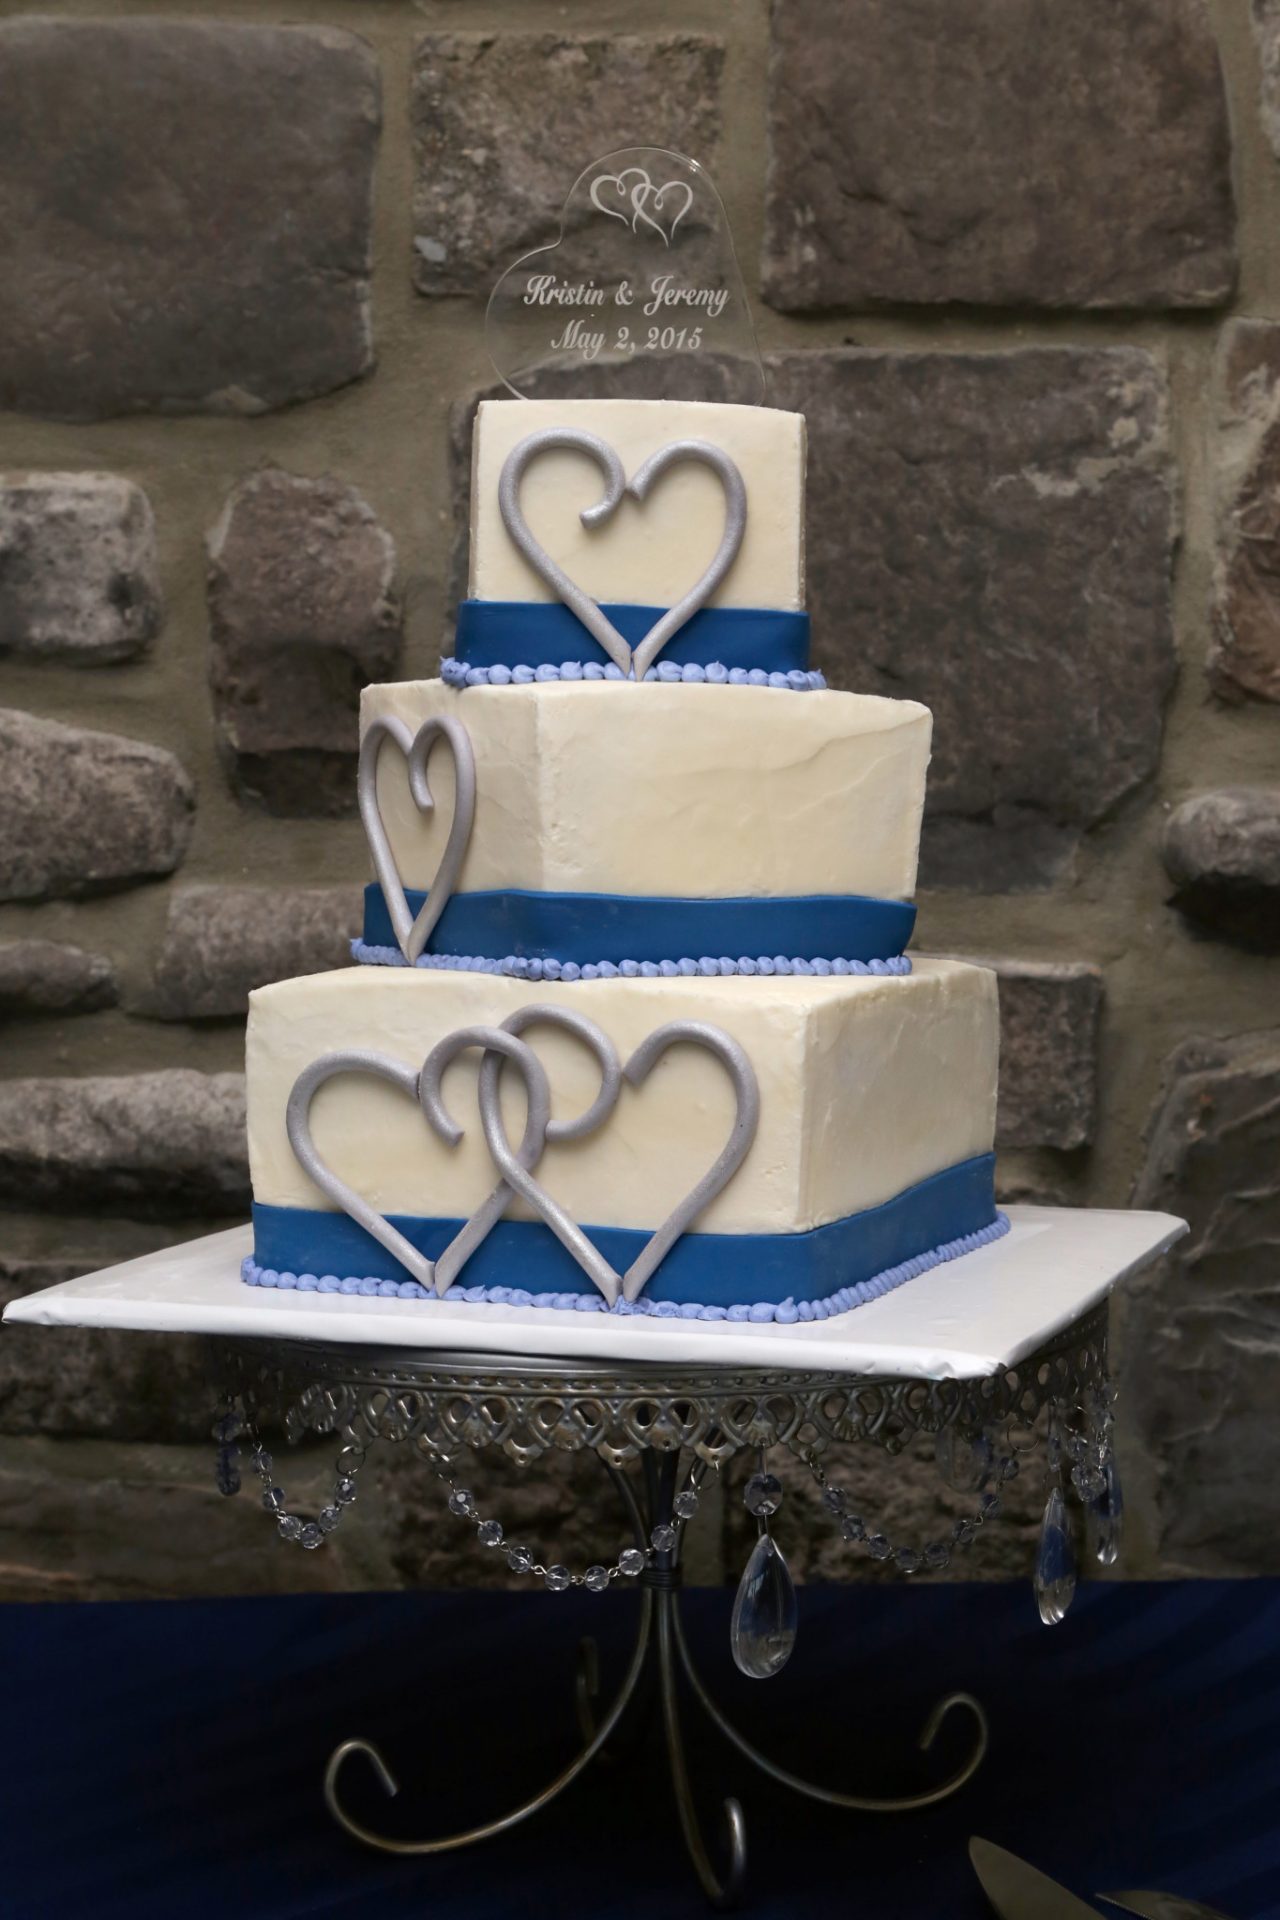 Jeremy and Kristin's cream and blue wedding cake with silver hearts drawn in icing on the sides of three tiered cake